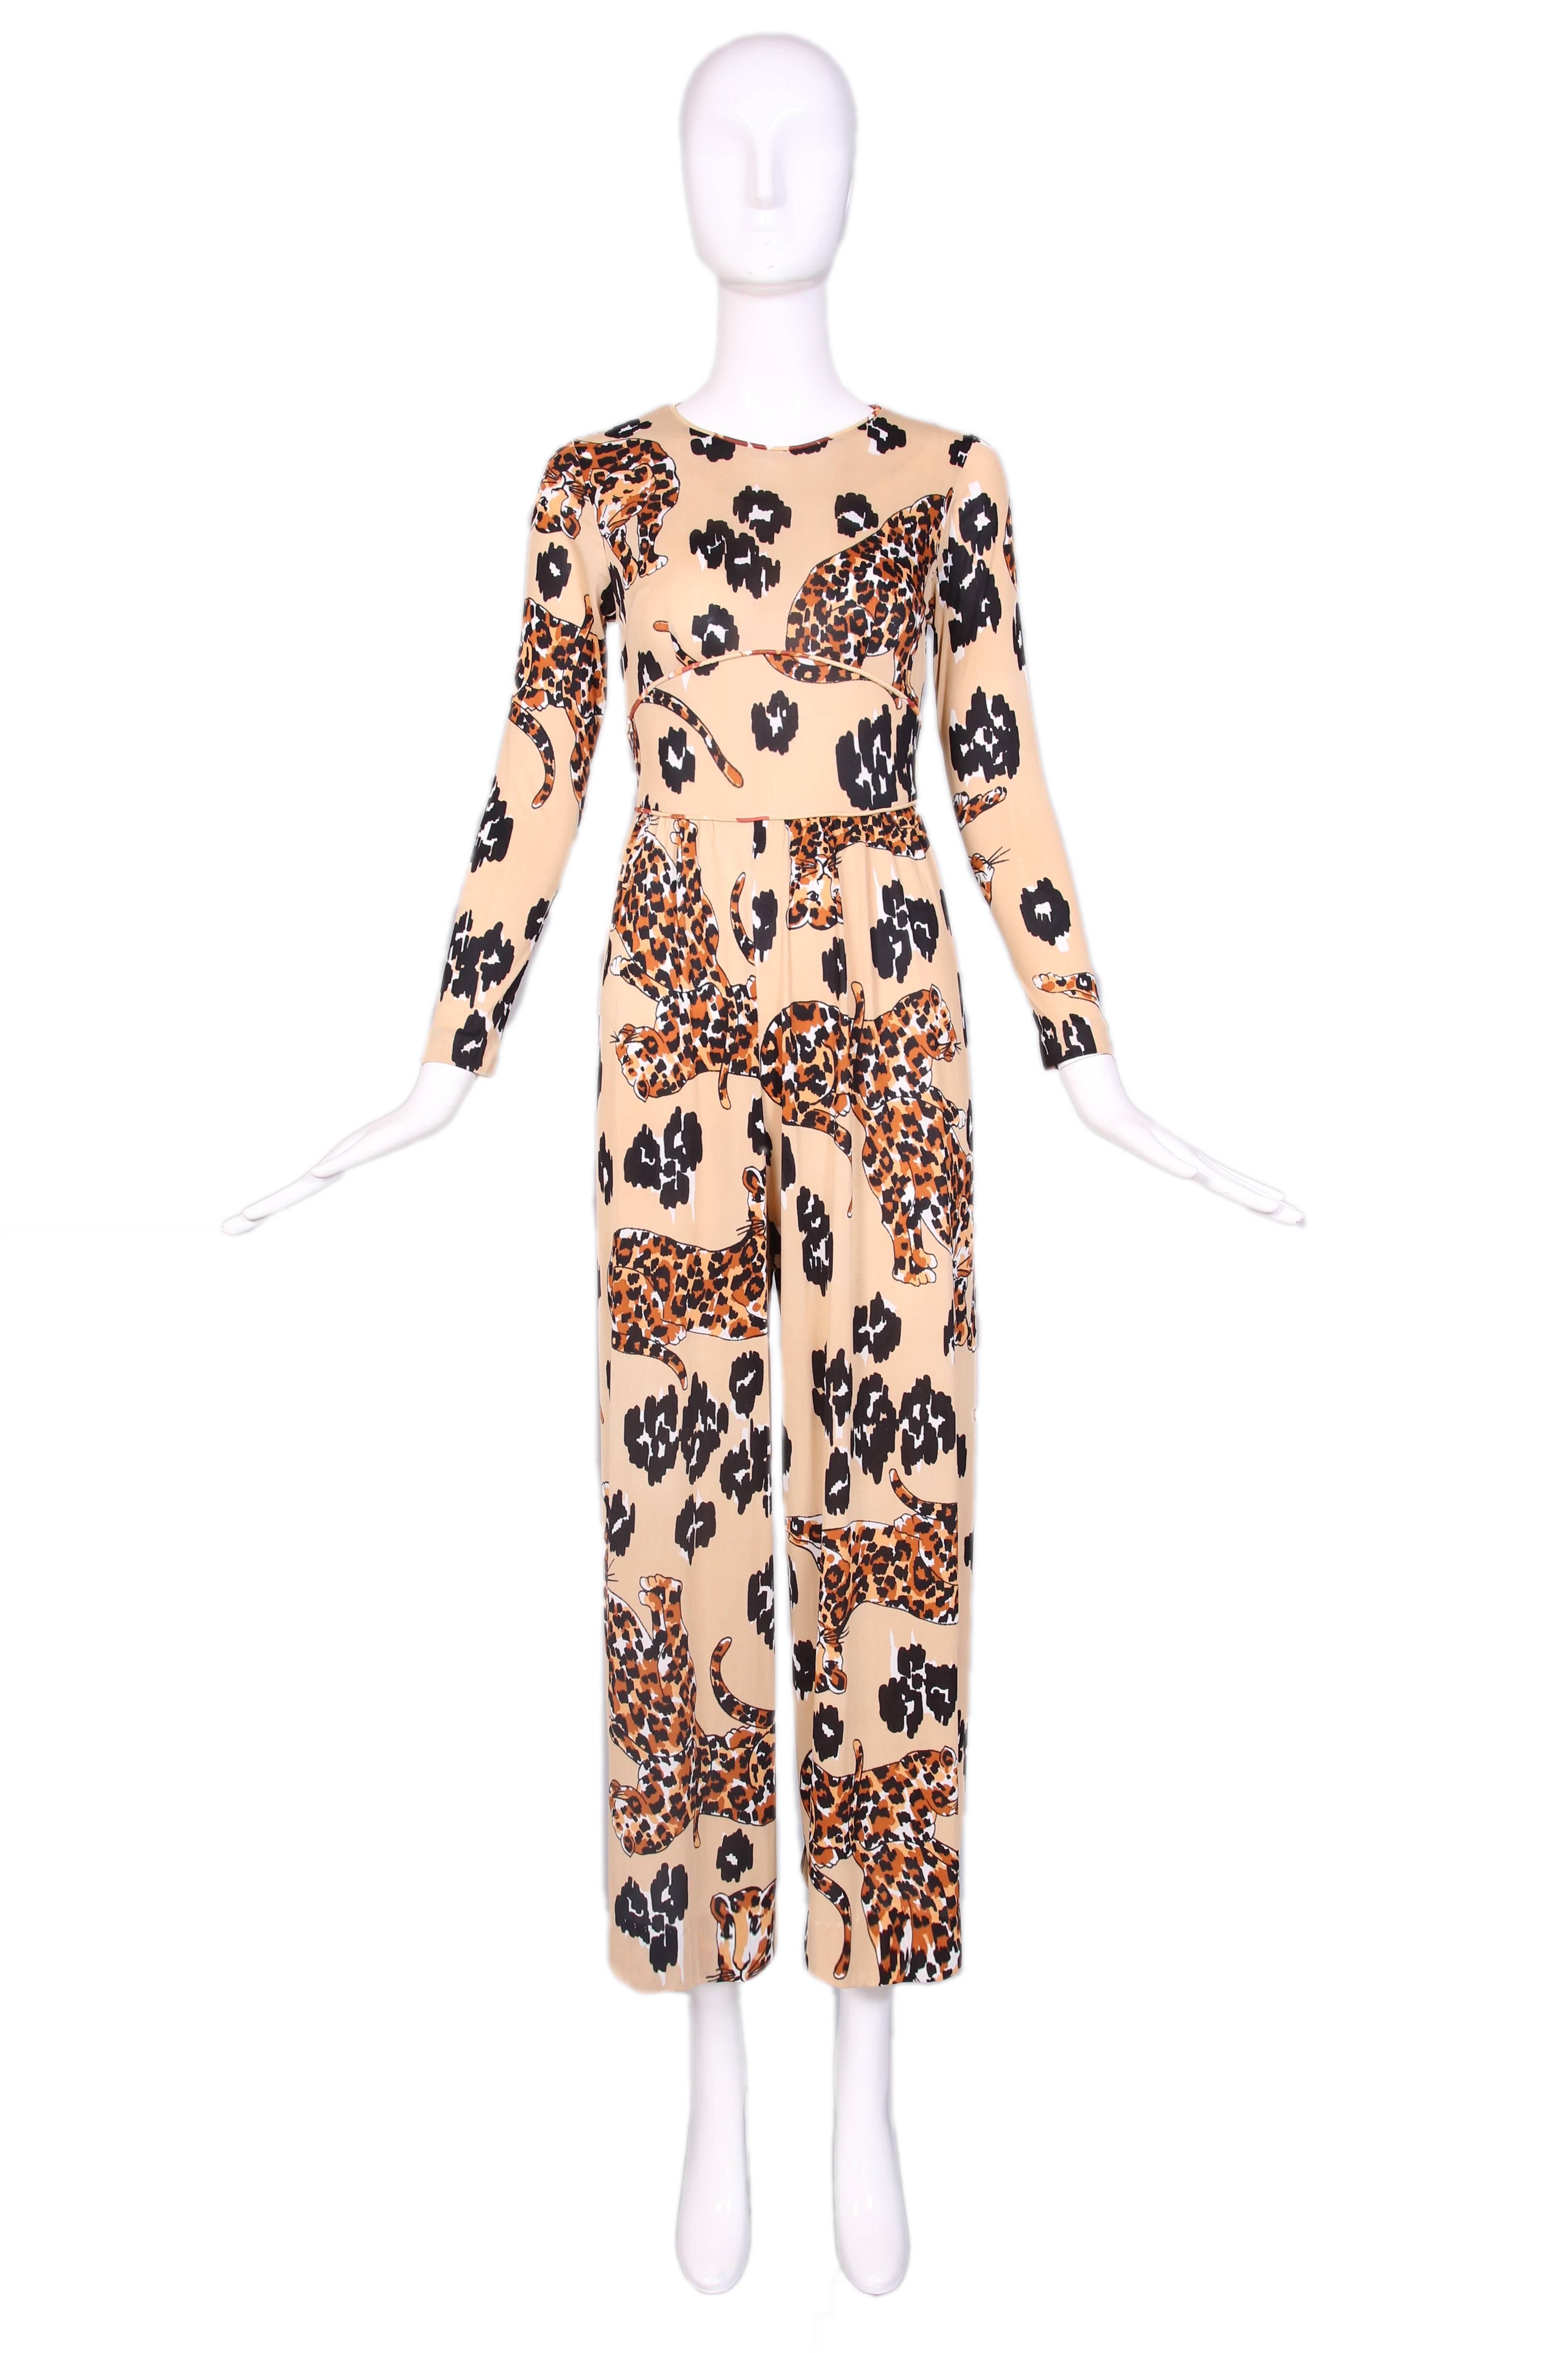 1970's leopard print print jersey jumpsuit with long sleeves and attached waist ties. In very good condition with a handful of tiny holes. No size tag. 
MEASUREMENTS:
Shoulder - 14"
Bust - 30"
Waist - 26"
Hip - 48"
Inseam -